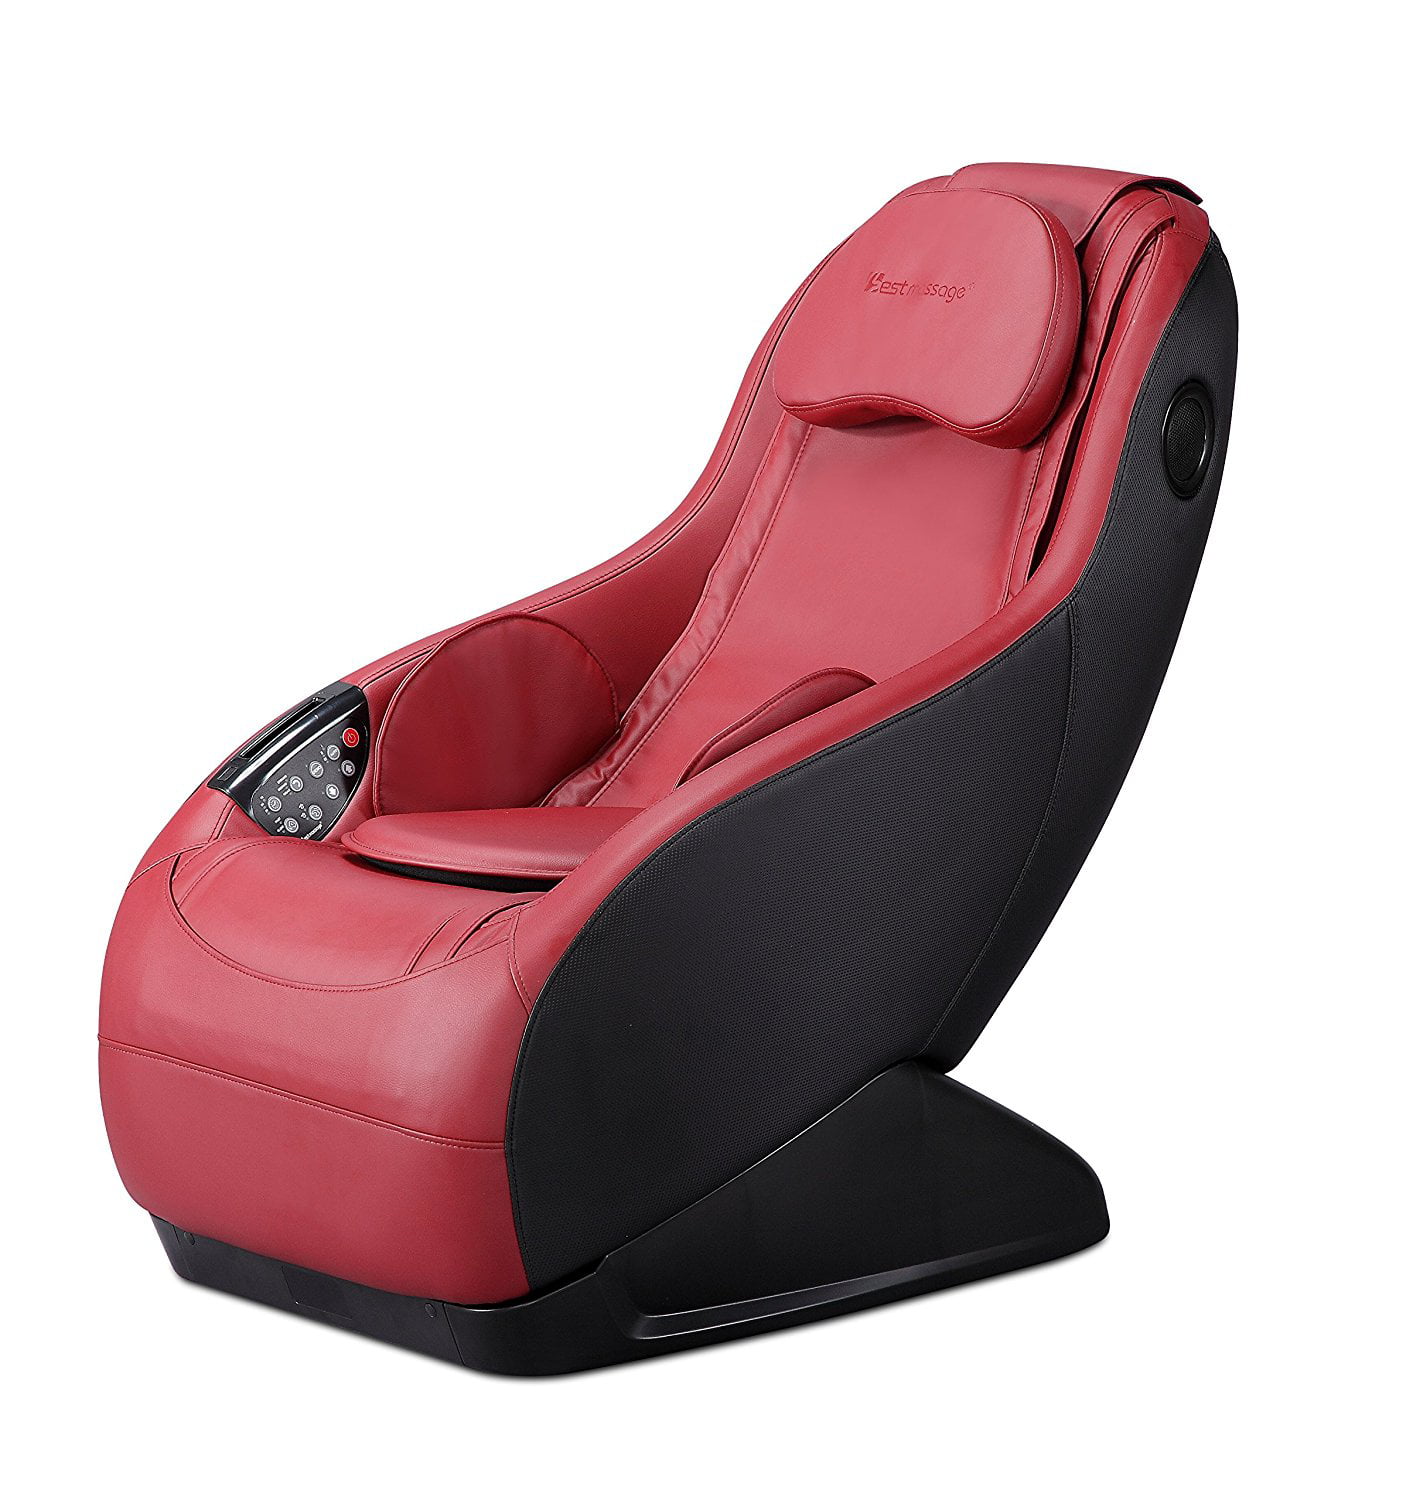 Bestmassage Full Body Gaming Shiatsu Massage Chair Recliner With Heat And Lon